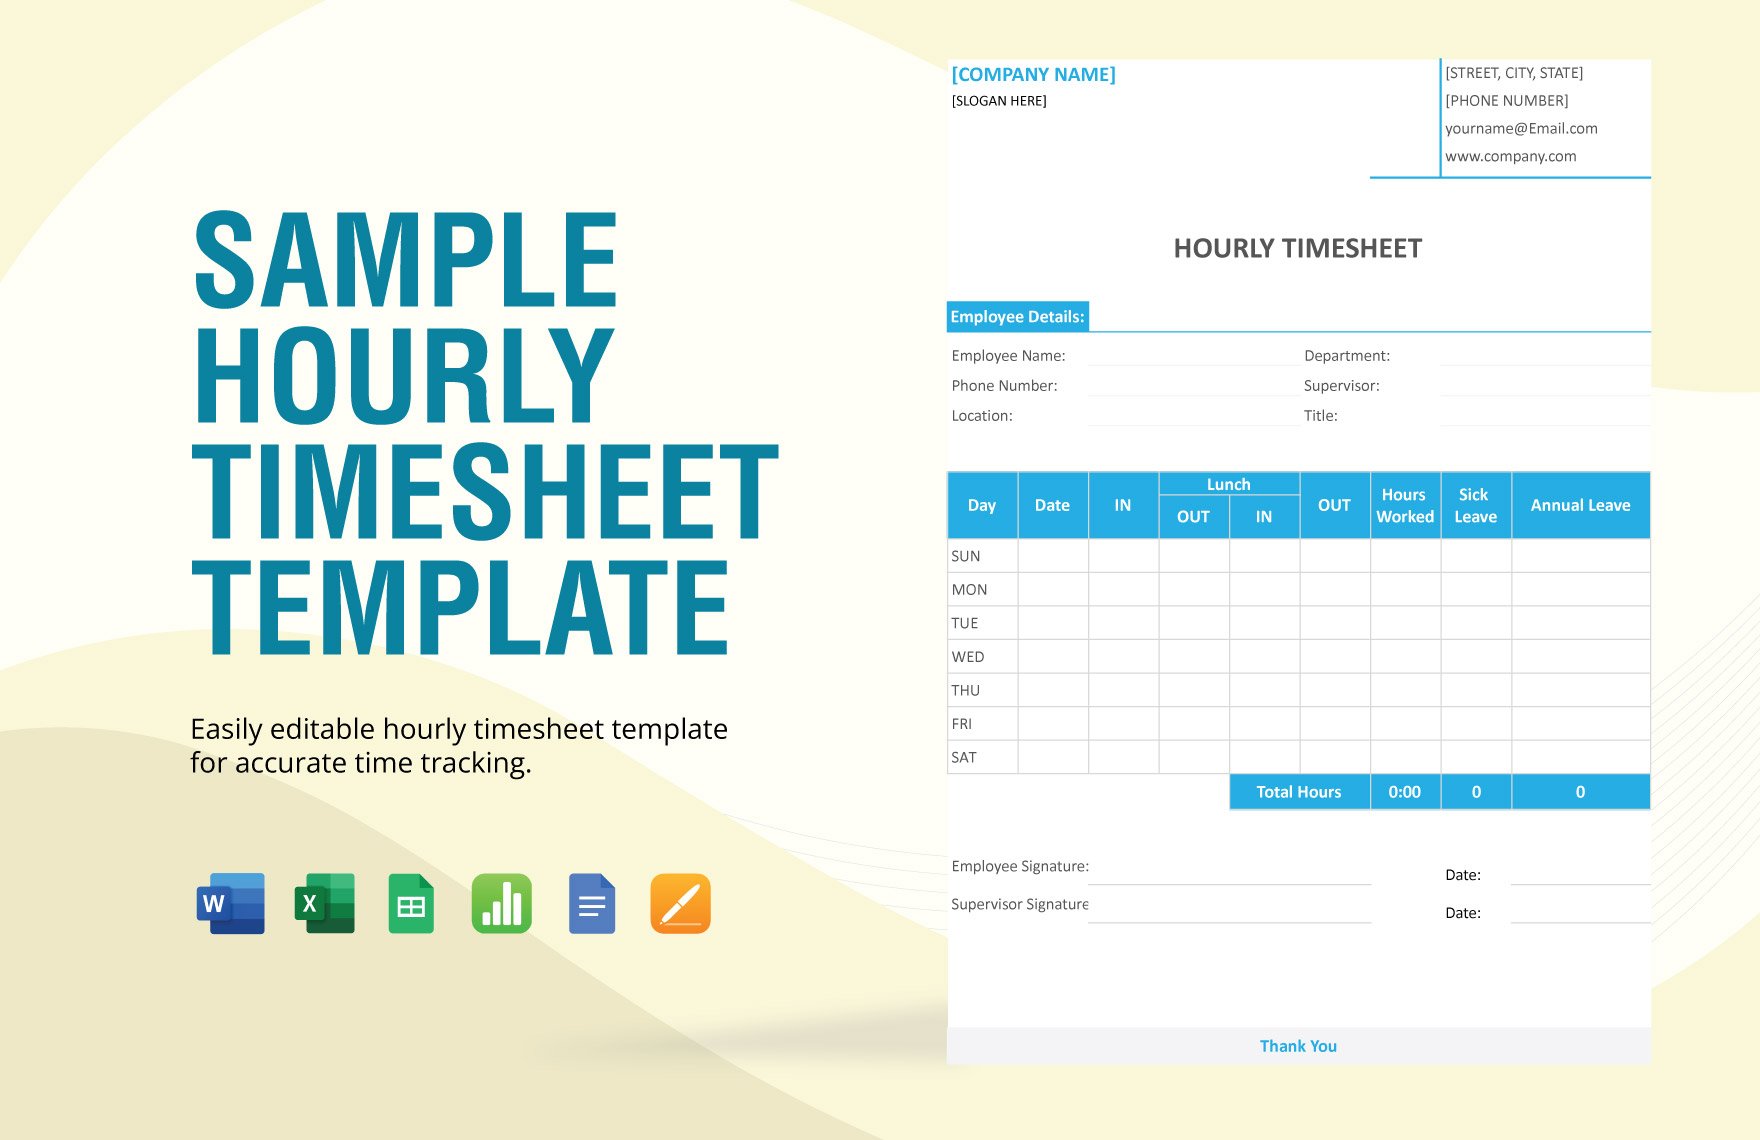 Sample Hourly Timesheet Template in Word, Google Docs, Excel, Google Sheets, Apple Pages, Apple Numbers